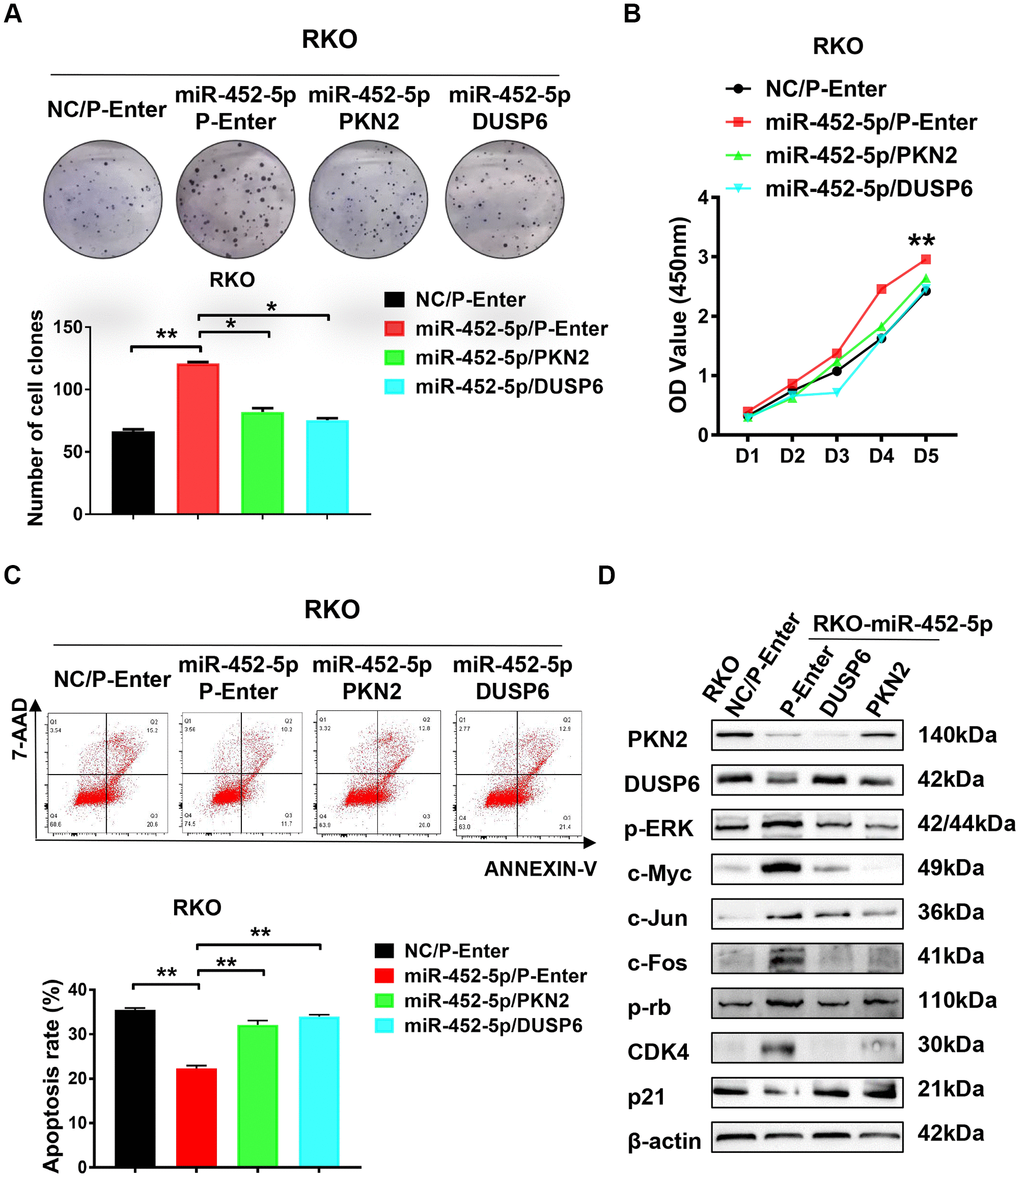 PKN2/DUSP6 axis is involved in the miR-452-5p regulation of CRC cells biological behaviors. (A) PKN2 and DUSP6 were verified to be involved in the regulation of miR-452-5p on colorectal cancer cell proliferation: panel cloning assay. (B) CCK8 assays showed that PKN2/DUSP6 reversed cell proliferation induced by miR-452-5p. (C) PKN2, DUSP6 were verified to be involved in the regulation of miR-452-5p on CRC cell apoptosis. (D) PKN2/DUSP6 axis was involved in the regulation of miR-452-5p on the important CRC signaling pathways.*p 